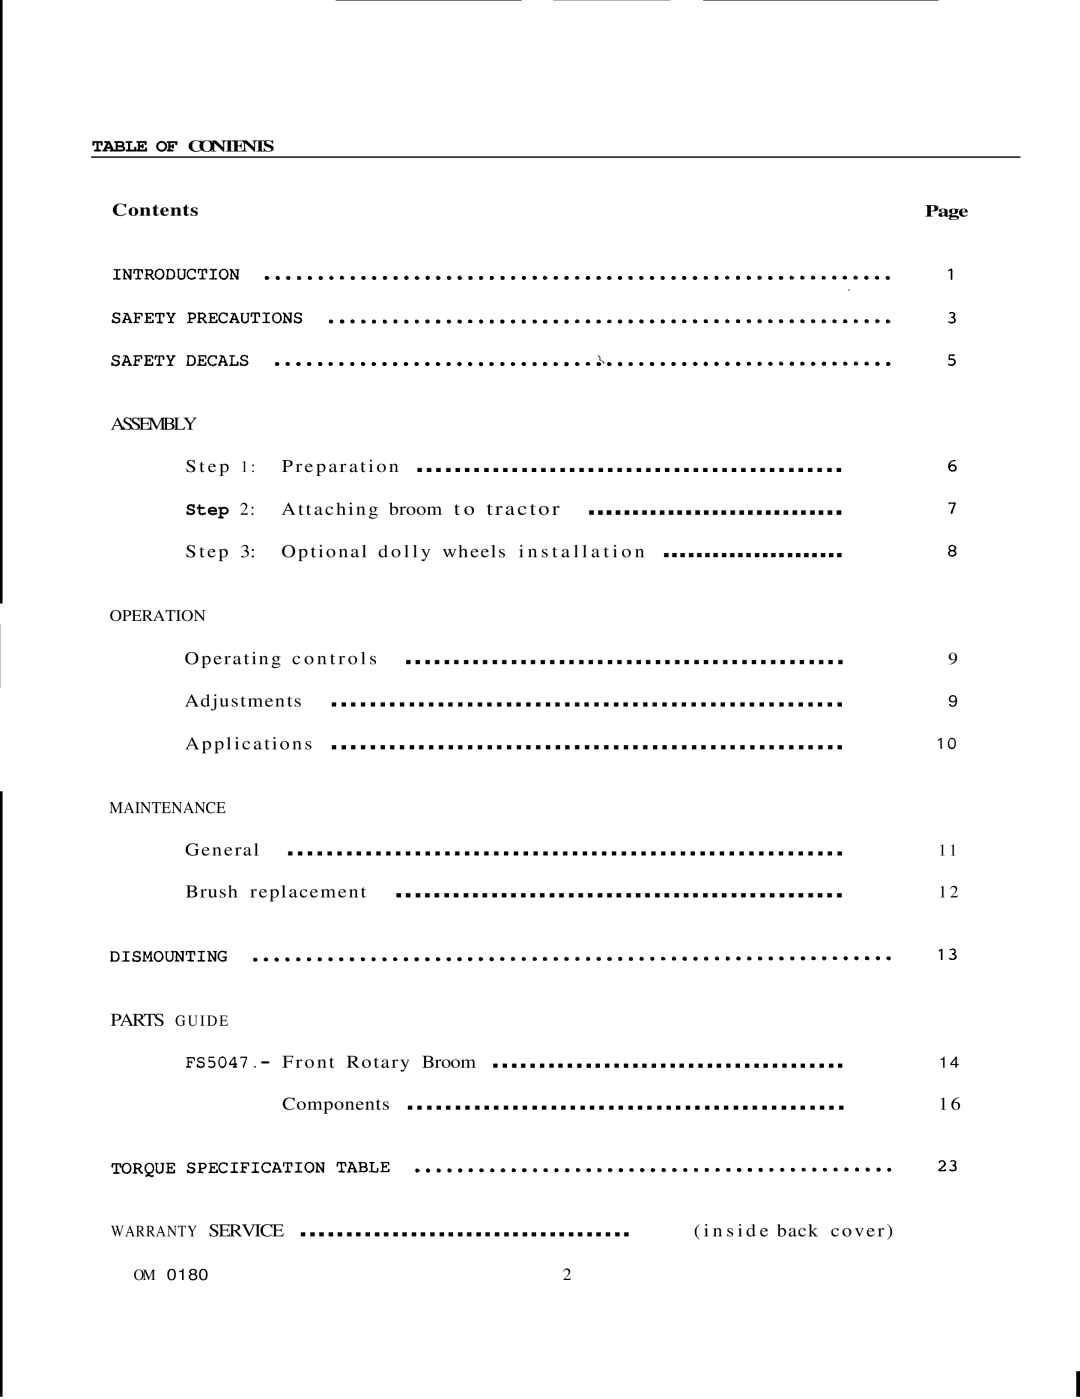 Honda Power Equipment FS5047 manual T r a c t o r, Table of Contents 